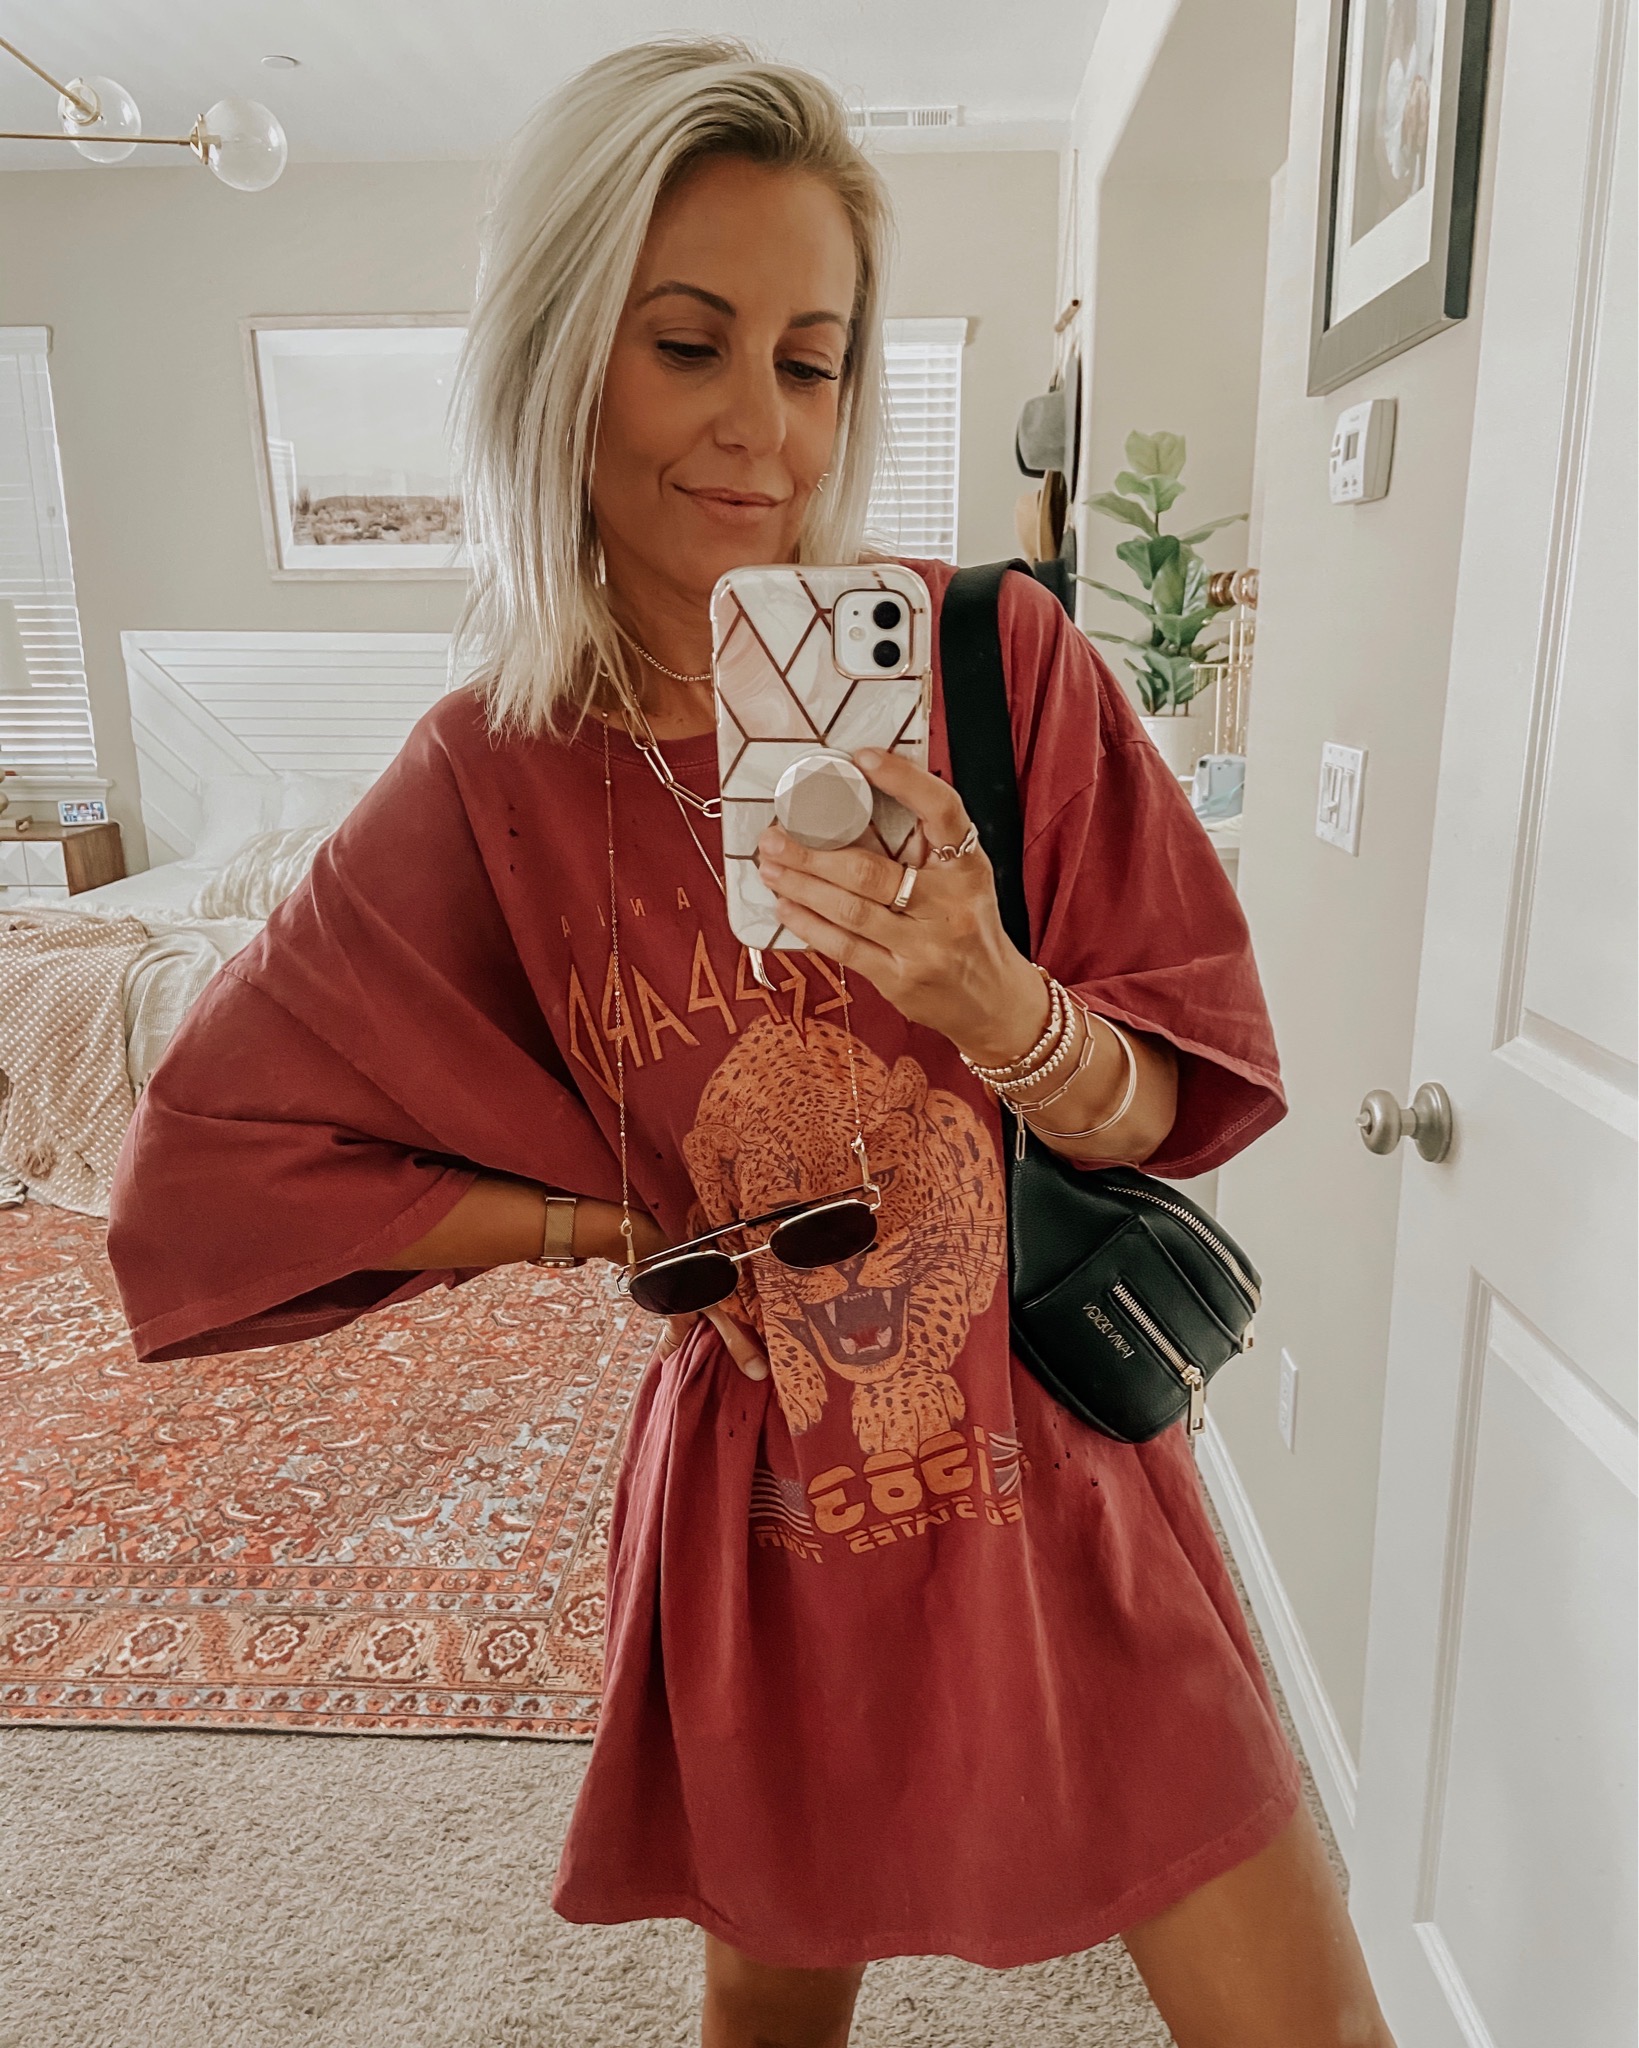 STYLING OVERSIZED GRAPHIC TEES- Jaclyn De Leon Style+ sharing tips and tricks for styling oversized graphic tees. Pairing them with shorts, as a dress and more!